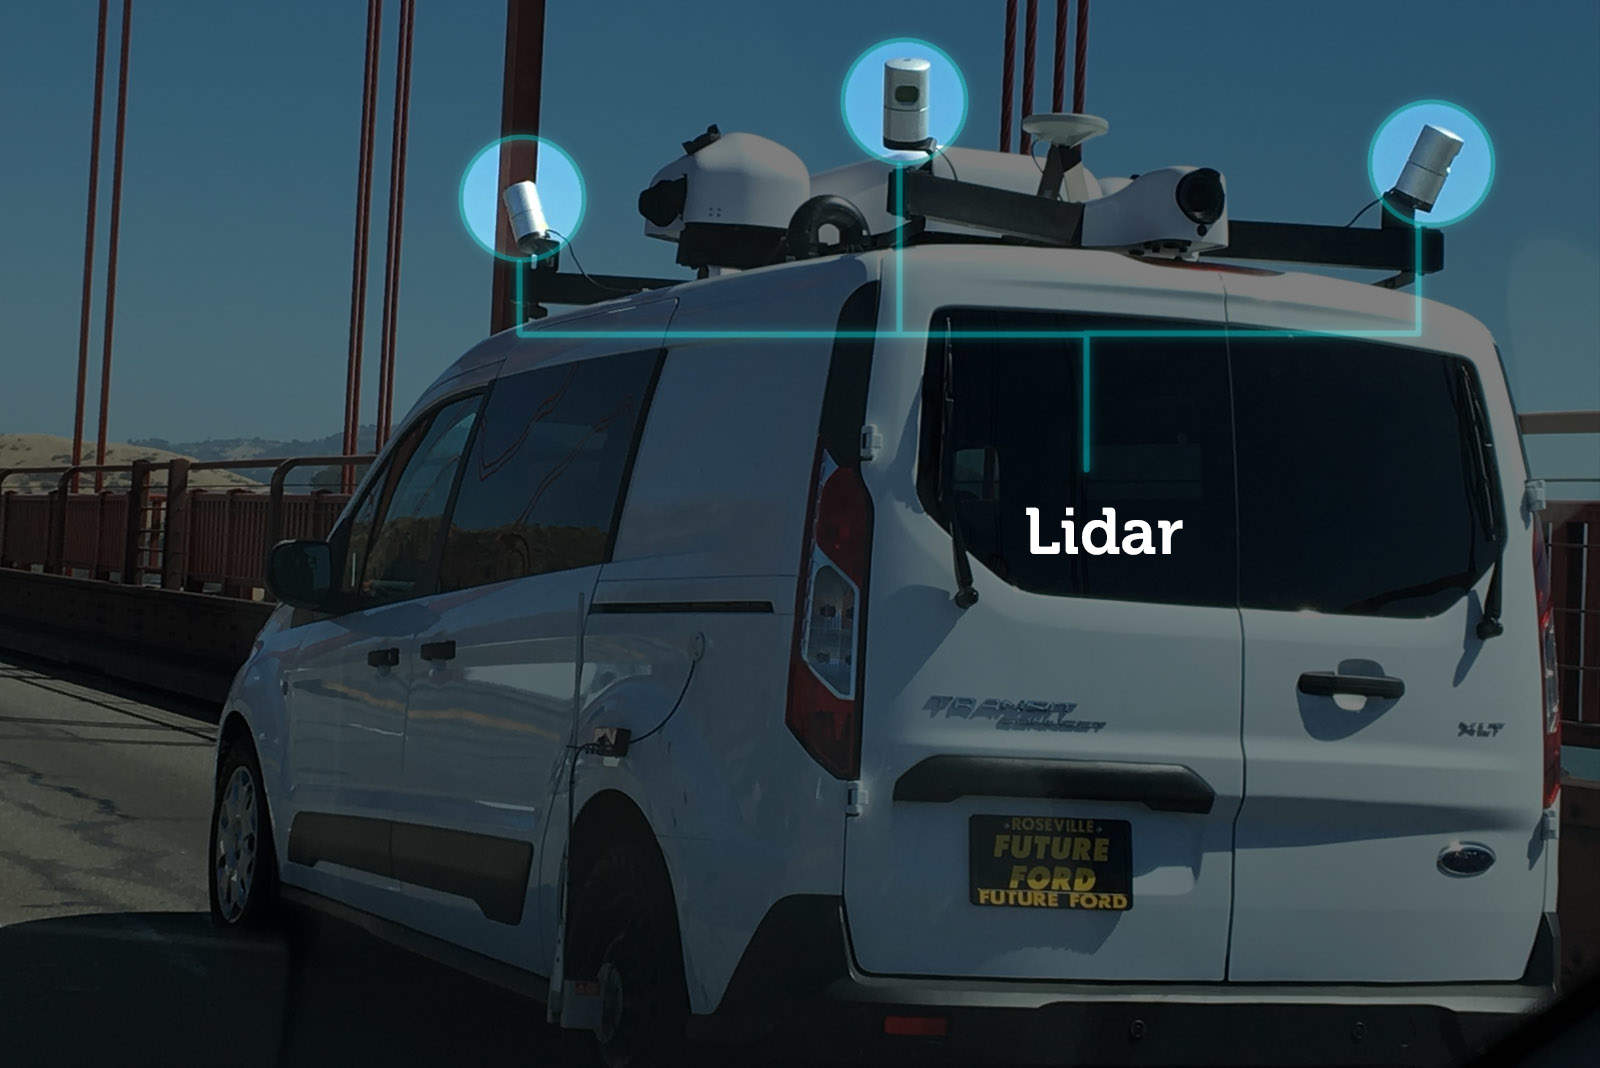 The four Velodyne Lidar sensors mounted on each corner are likely generating a "point cloud' -- an ultra precise 3D scan of the road -- that'll be used to navigate self-driving cars. 